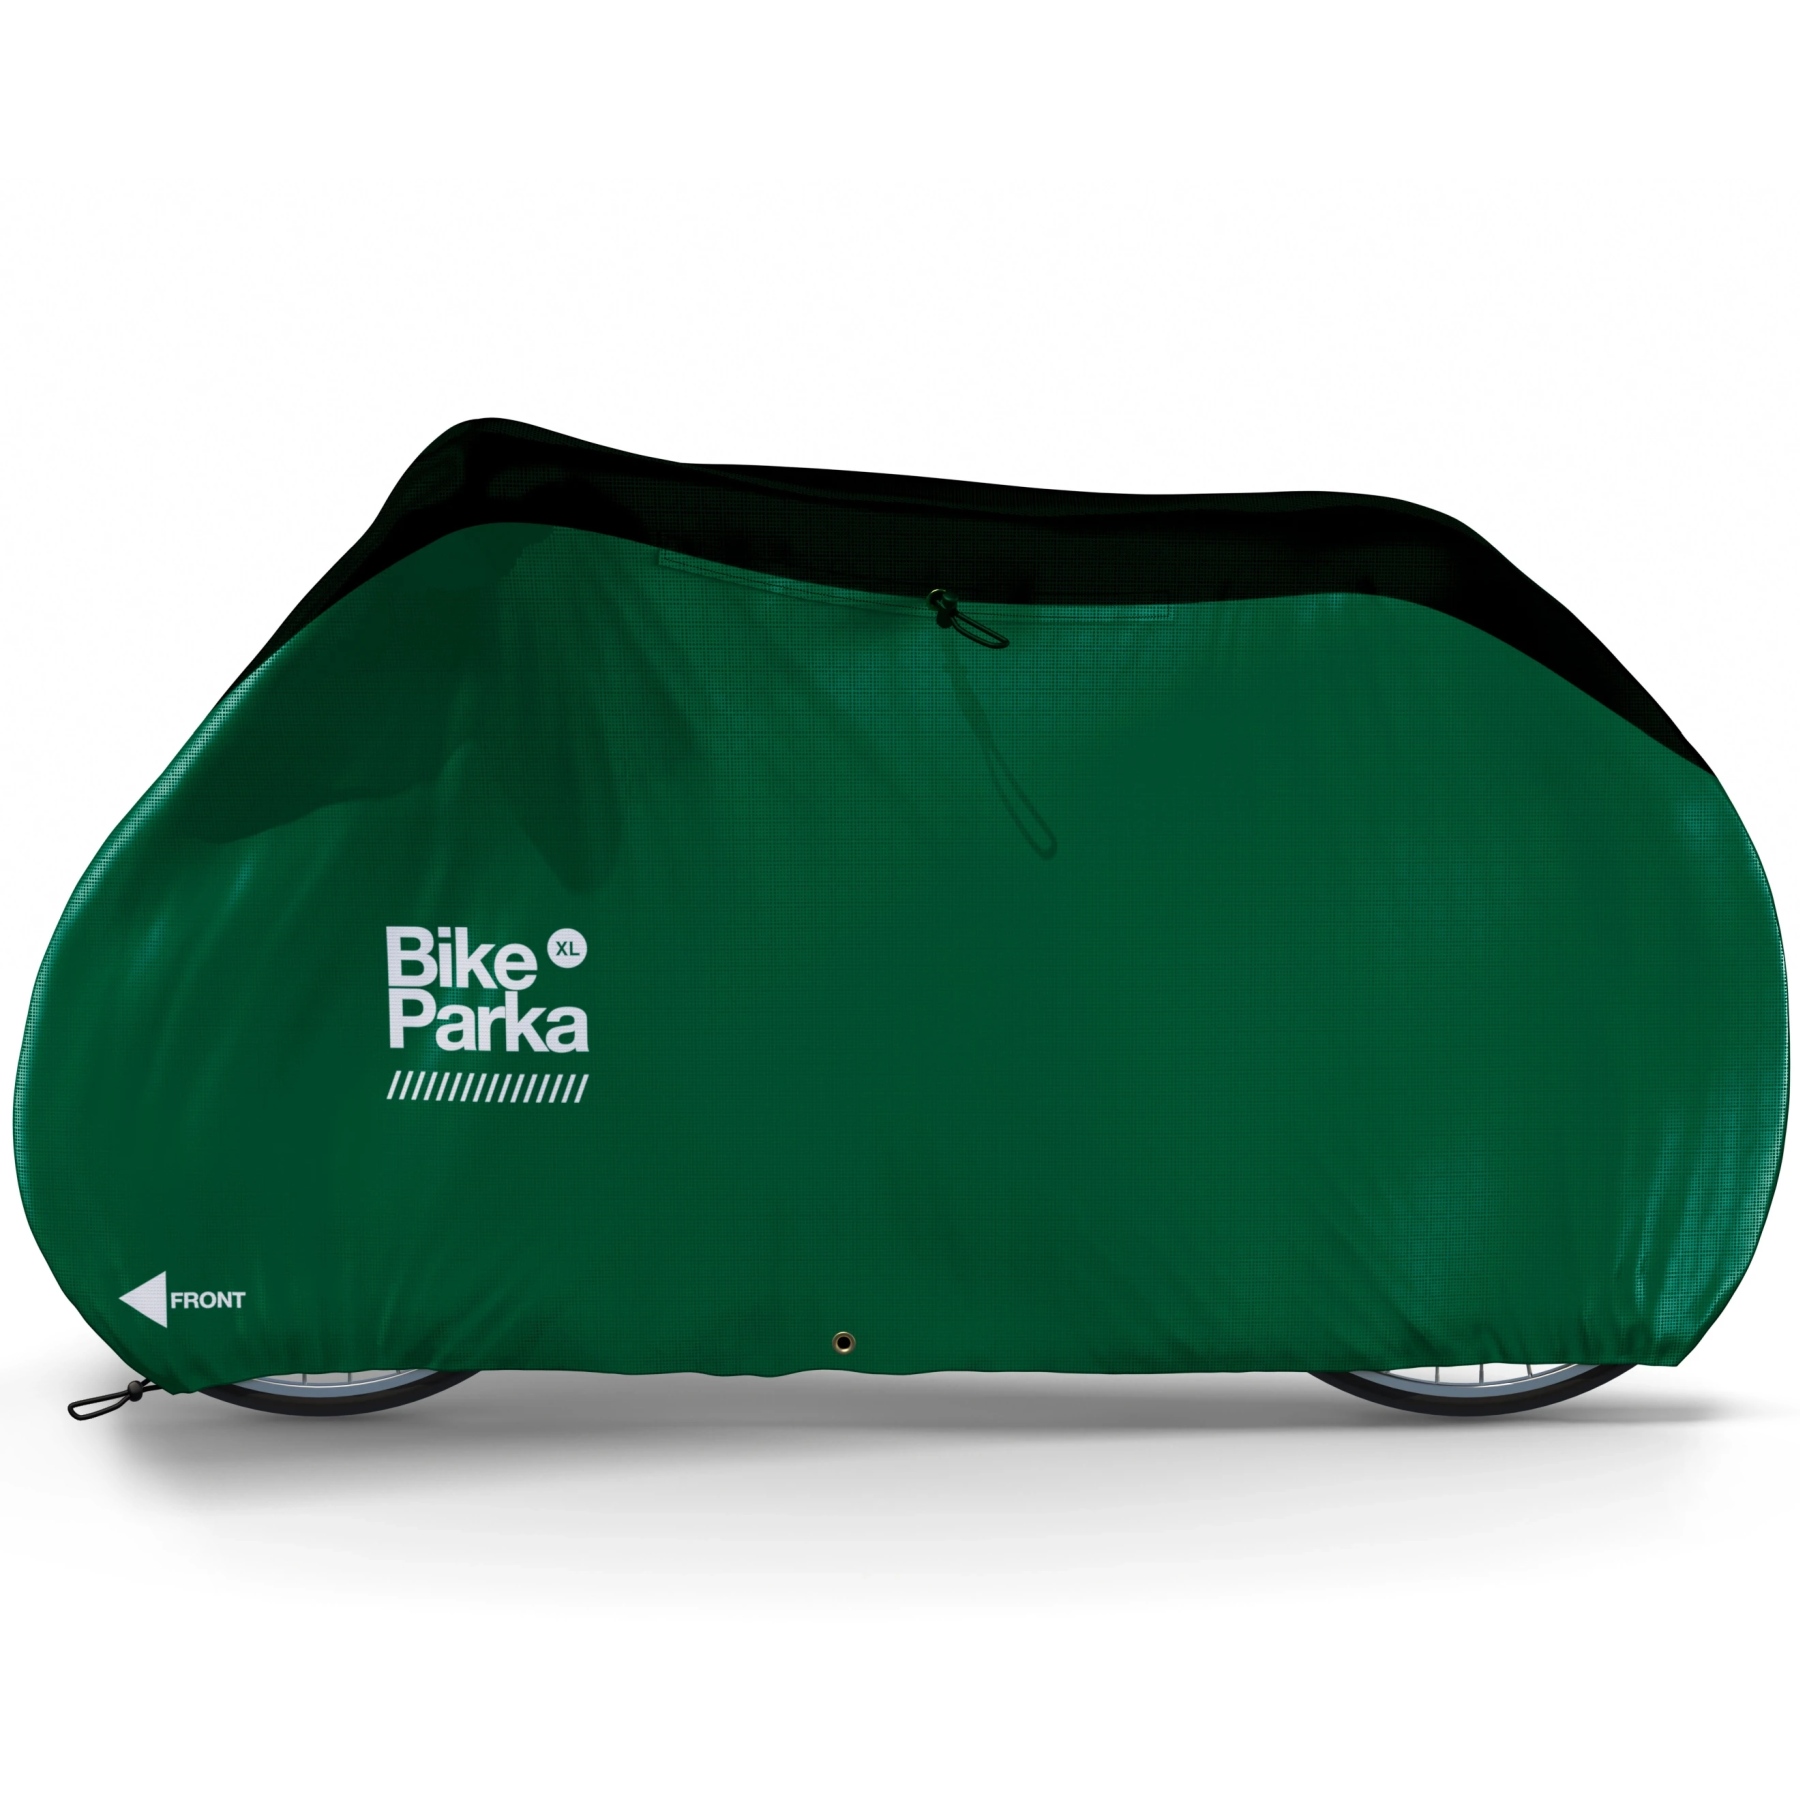 Productfoto van BikeParka XL Bicycle Cover - Forest Green - 225x140cm